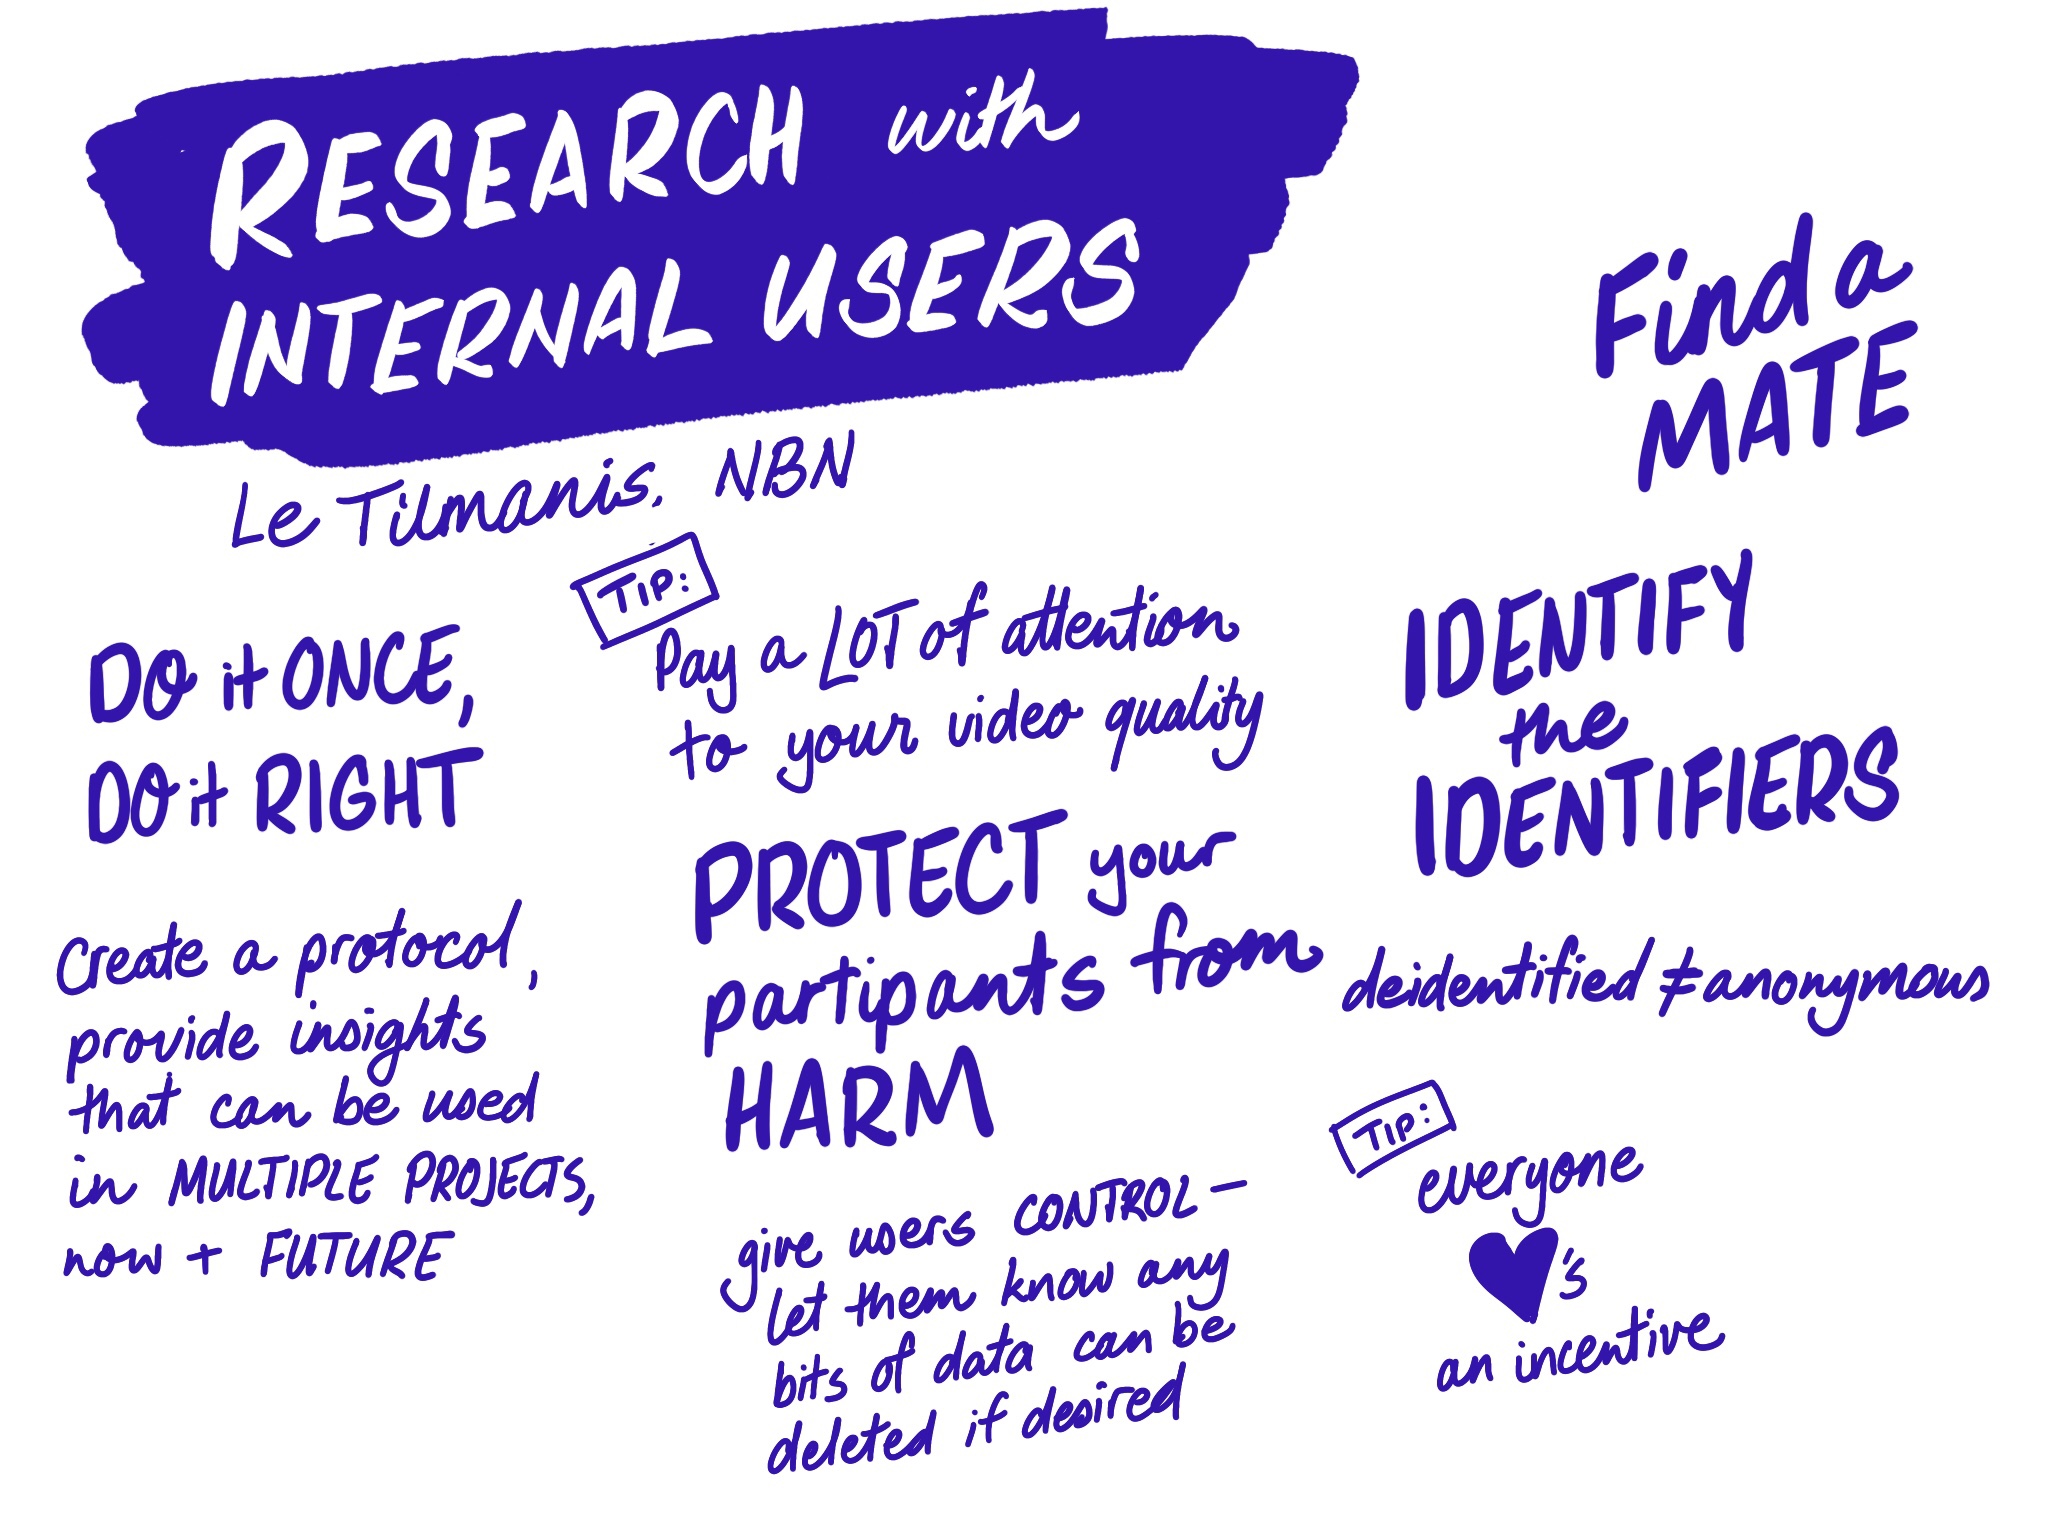 assets/sketching/img_1809-1.jpg|sketchnote: research with internal users